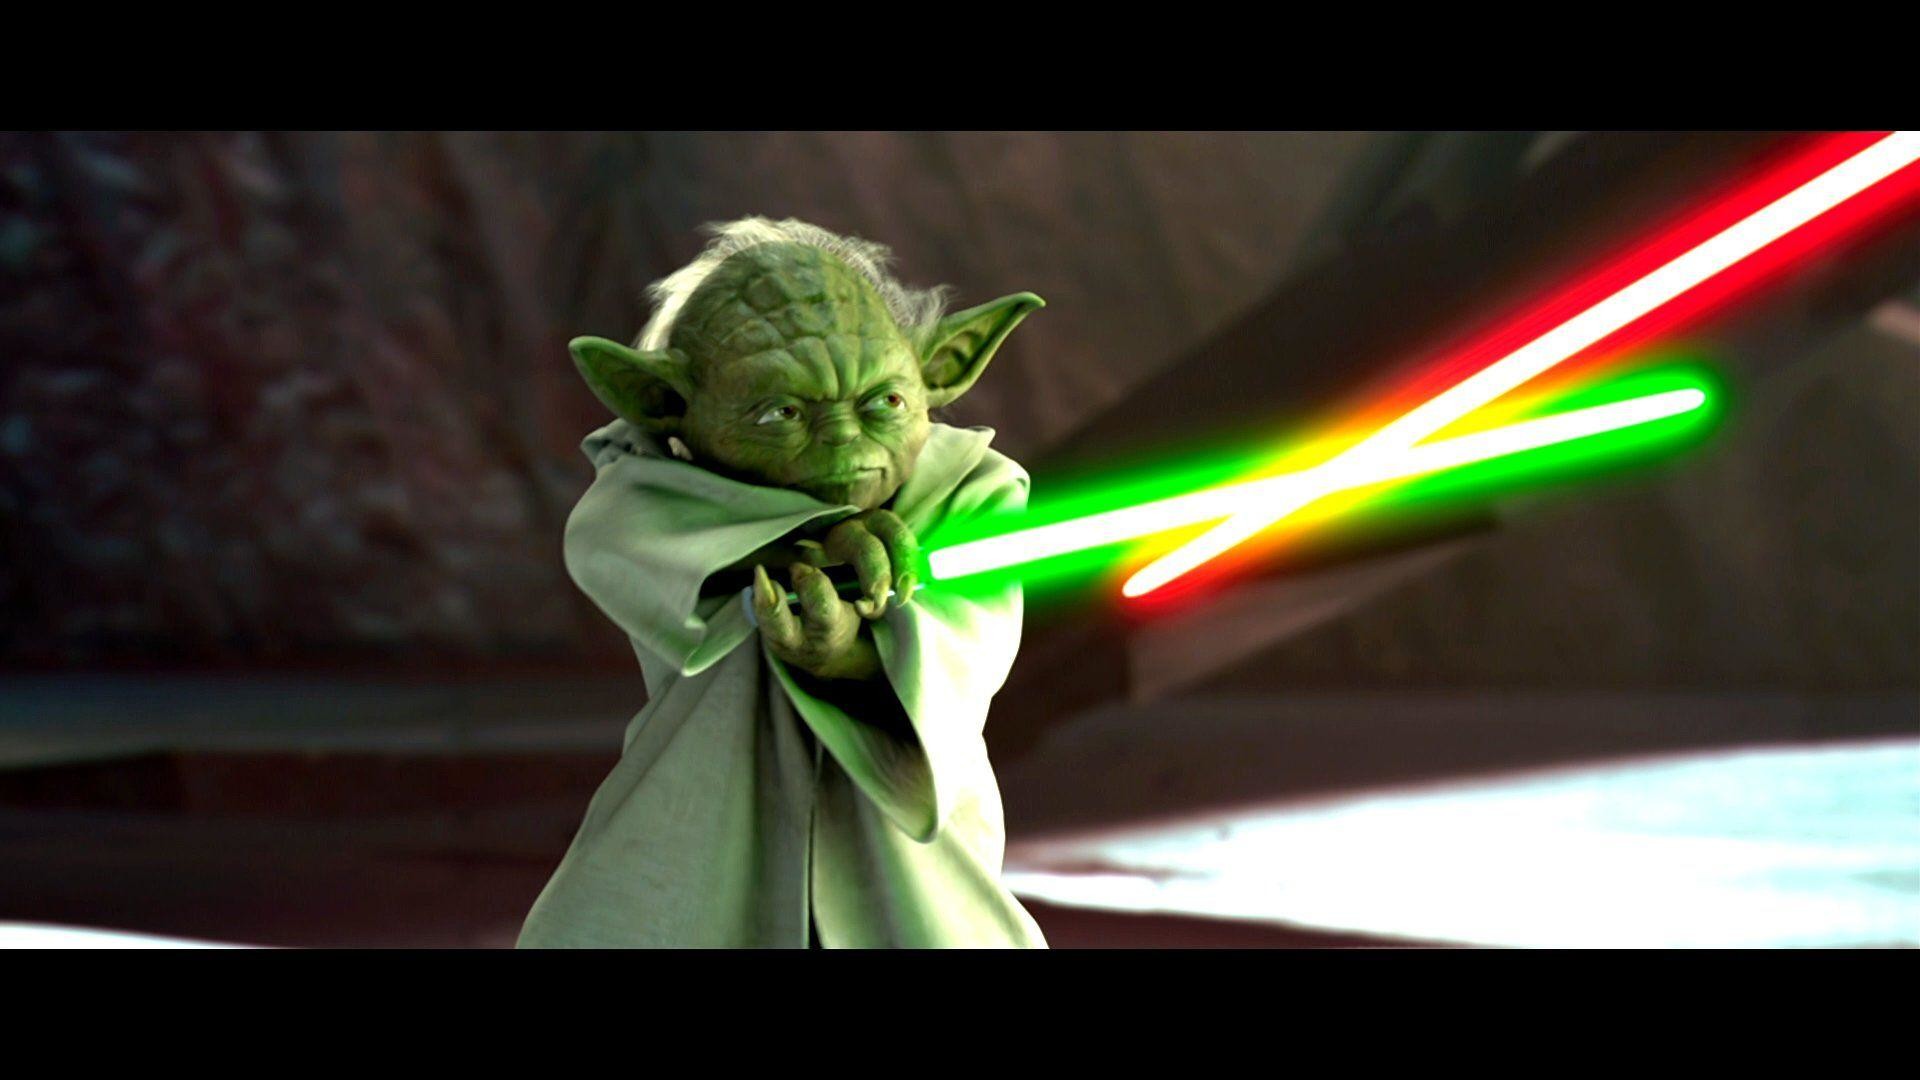 1920x1080 Central Wallpaper Master Yoda Star Wars Hd Wallpapers - SIMPLE HOME .